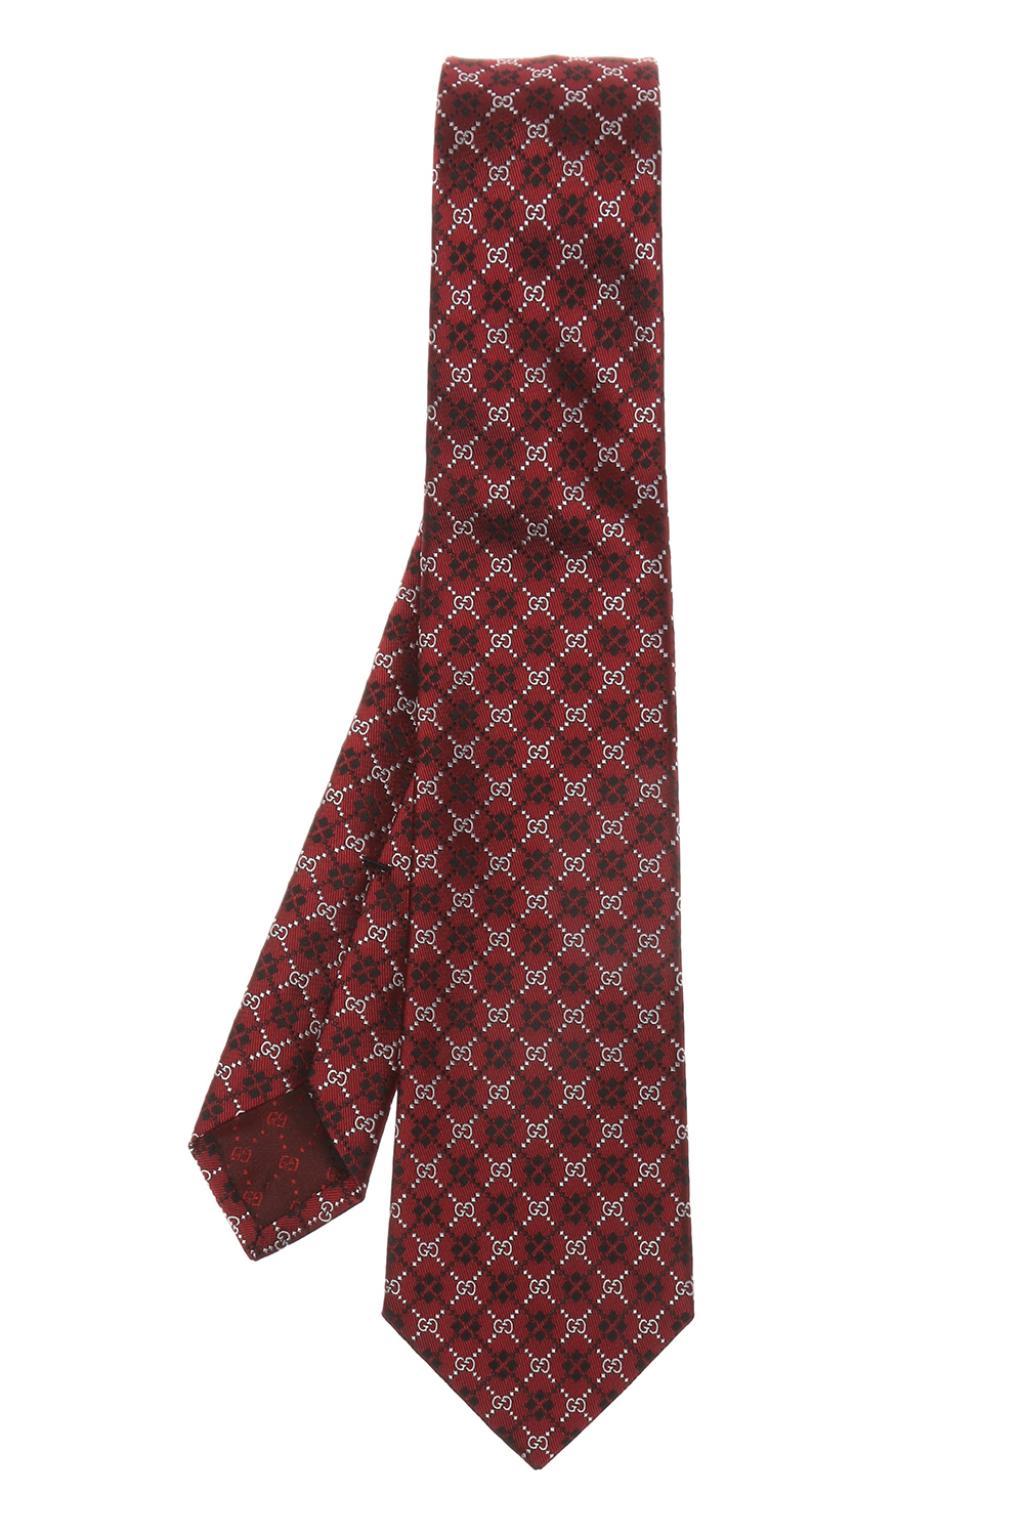 Gucci Branded Silk Tie in Burgundy (Red) for Men - Save 3% - Lyst